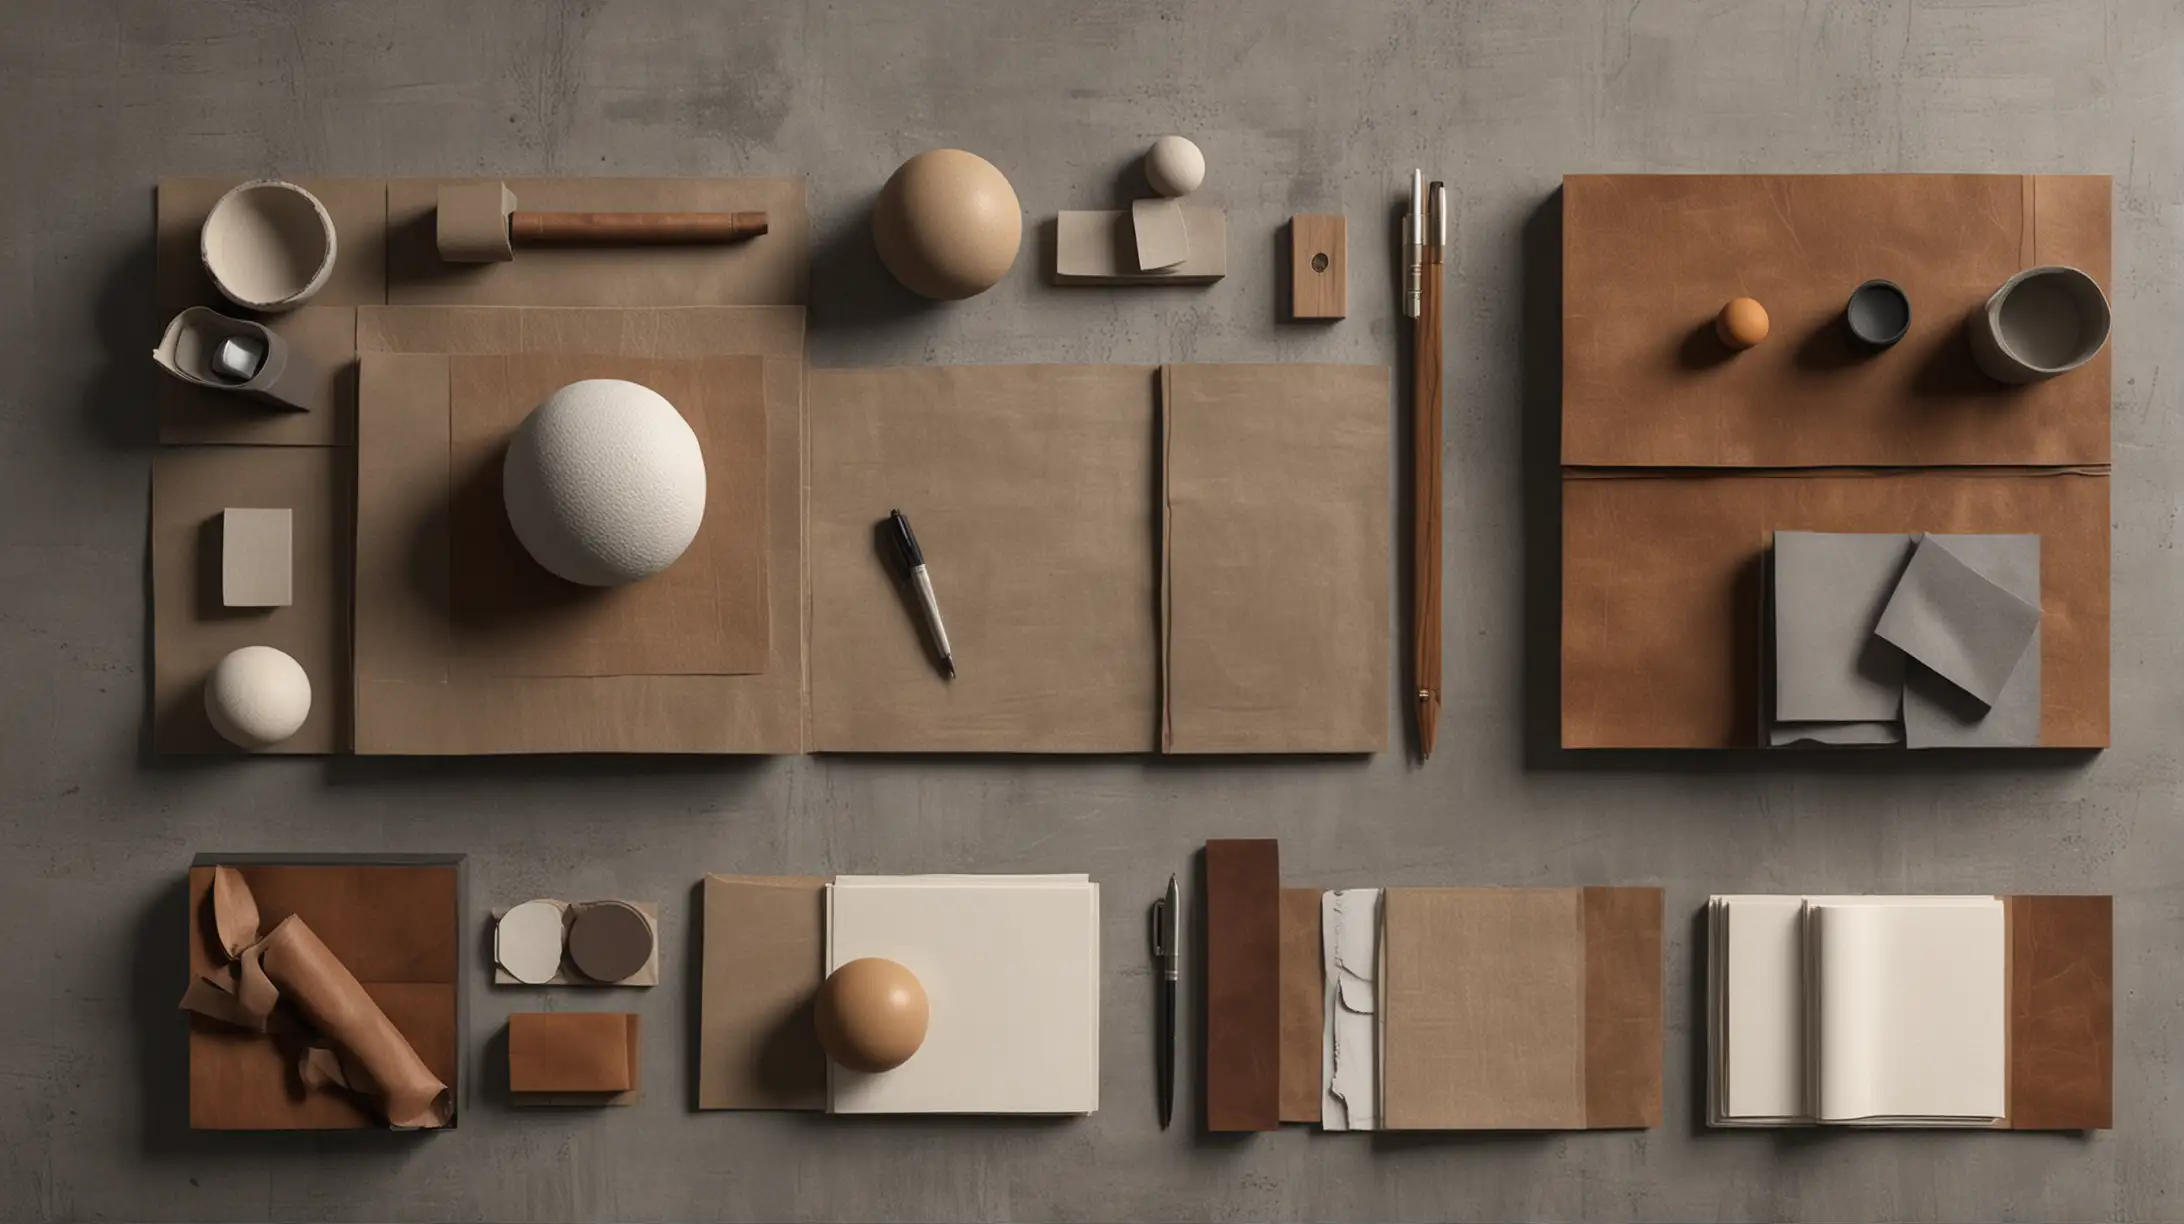 Material collage from interior architecture in realistic 3D setup, different shapes, square, rectangles, natural materials, pen and paper, various textures, olive-colored fabric, dark leather, light gray in small sphere, dark gray in rectangle on table, minimalism and design